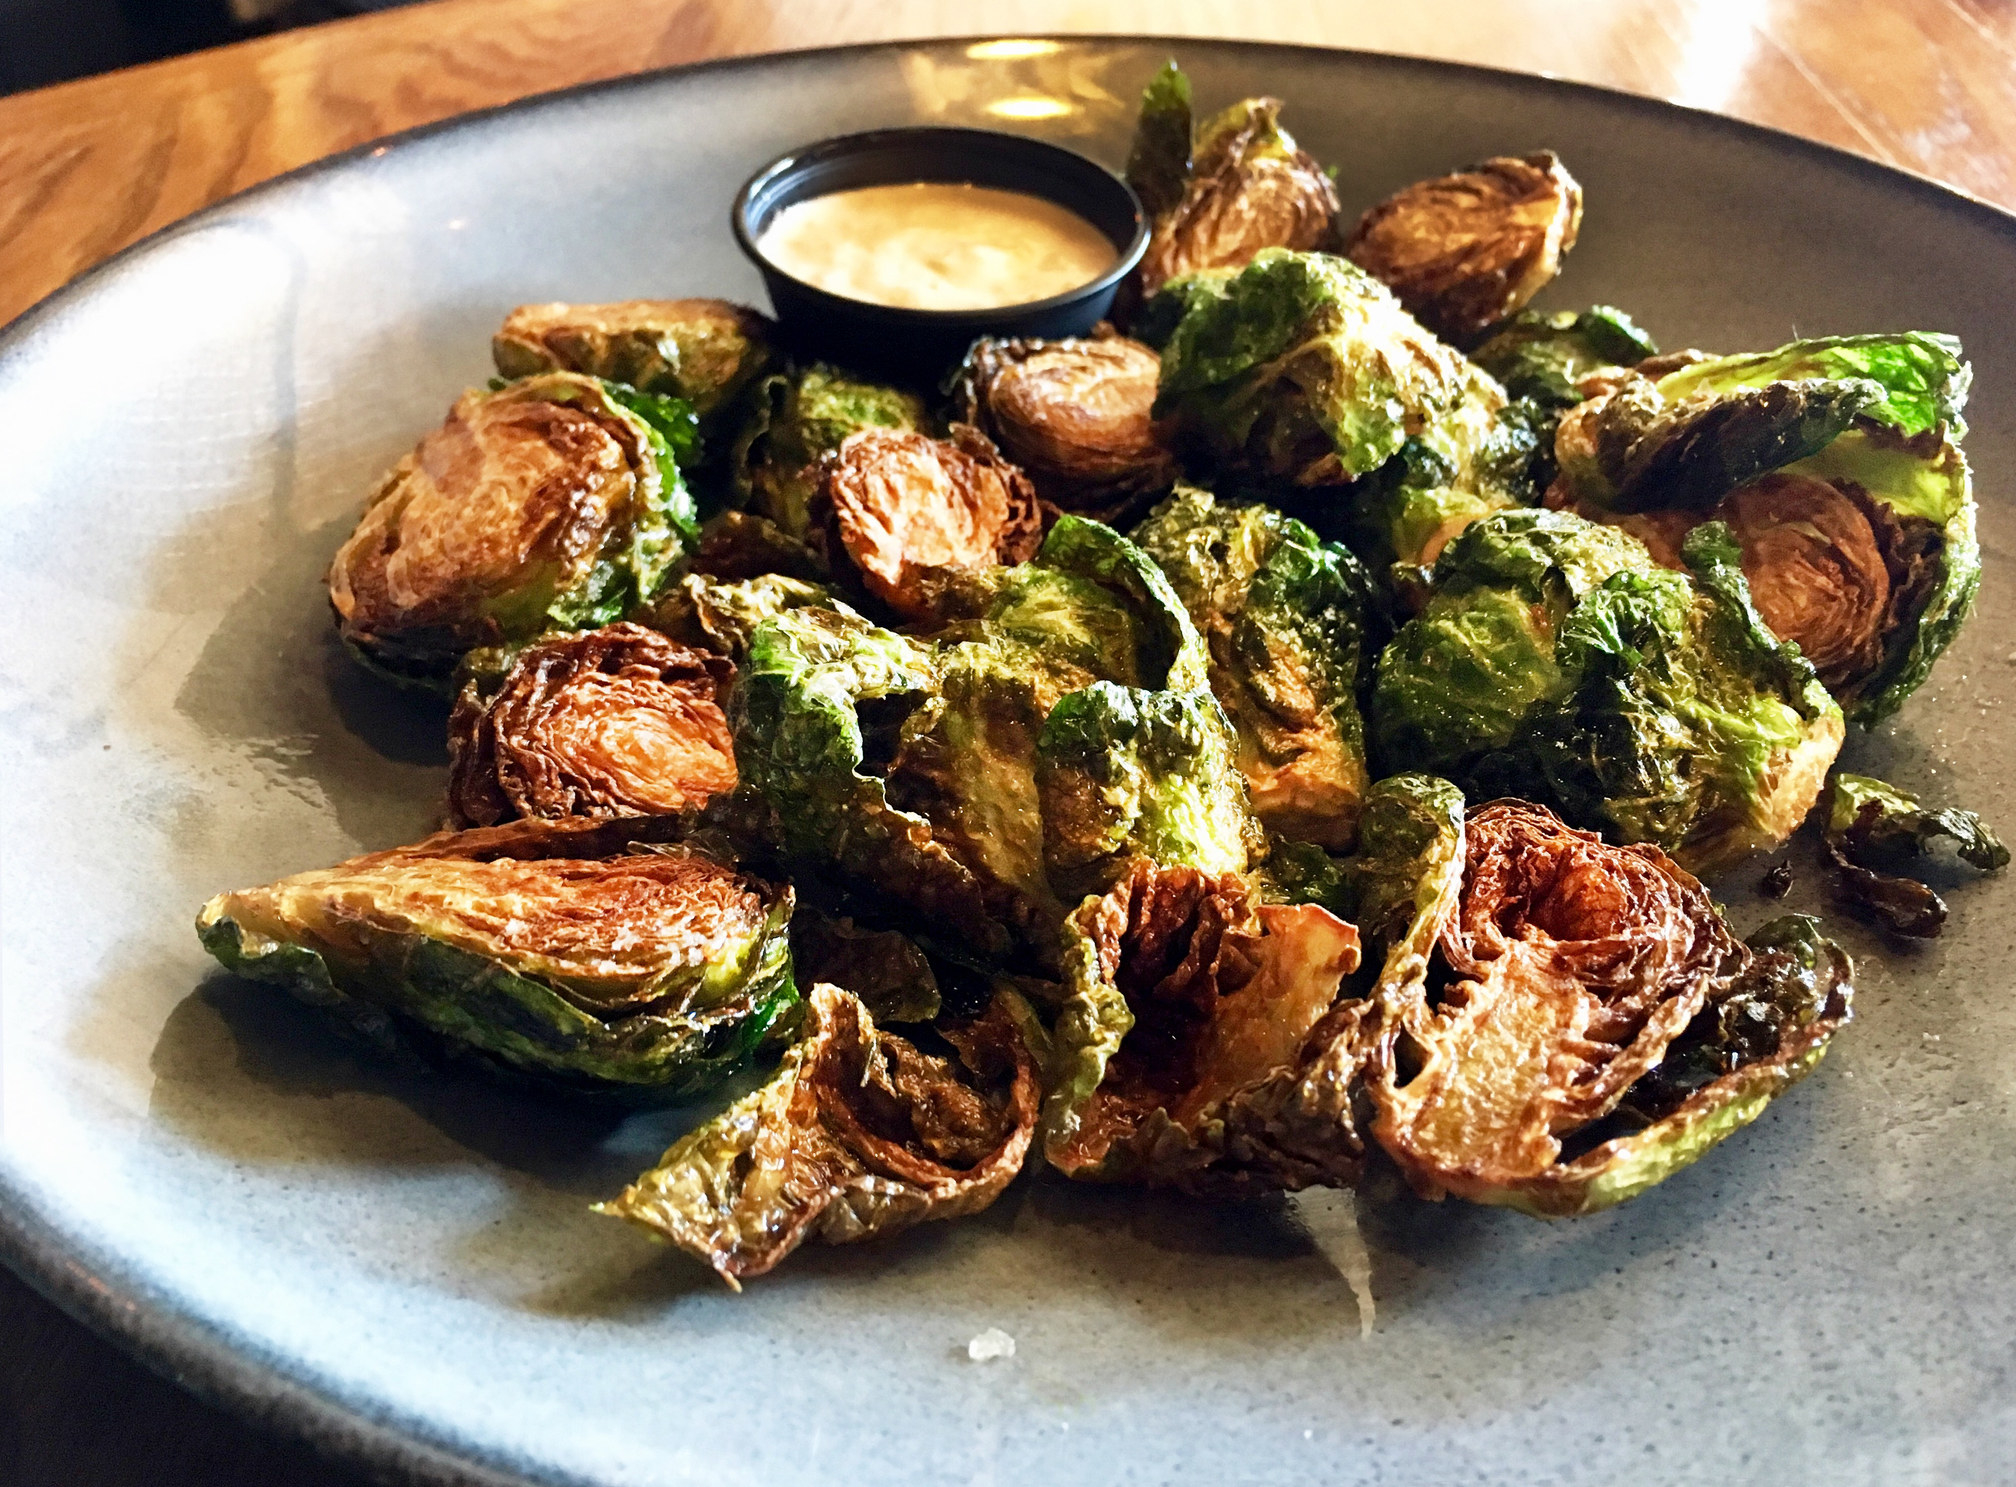 Crispy Brussels sprouts.